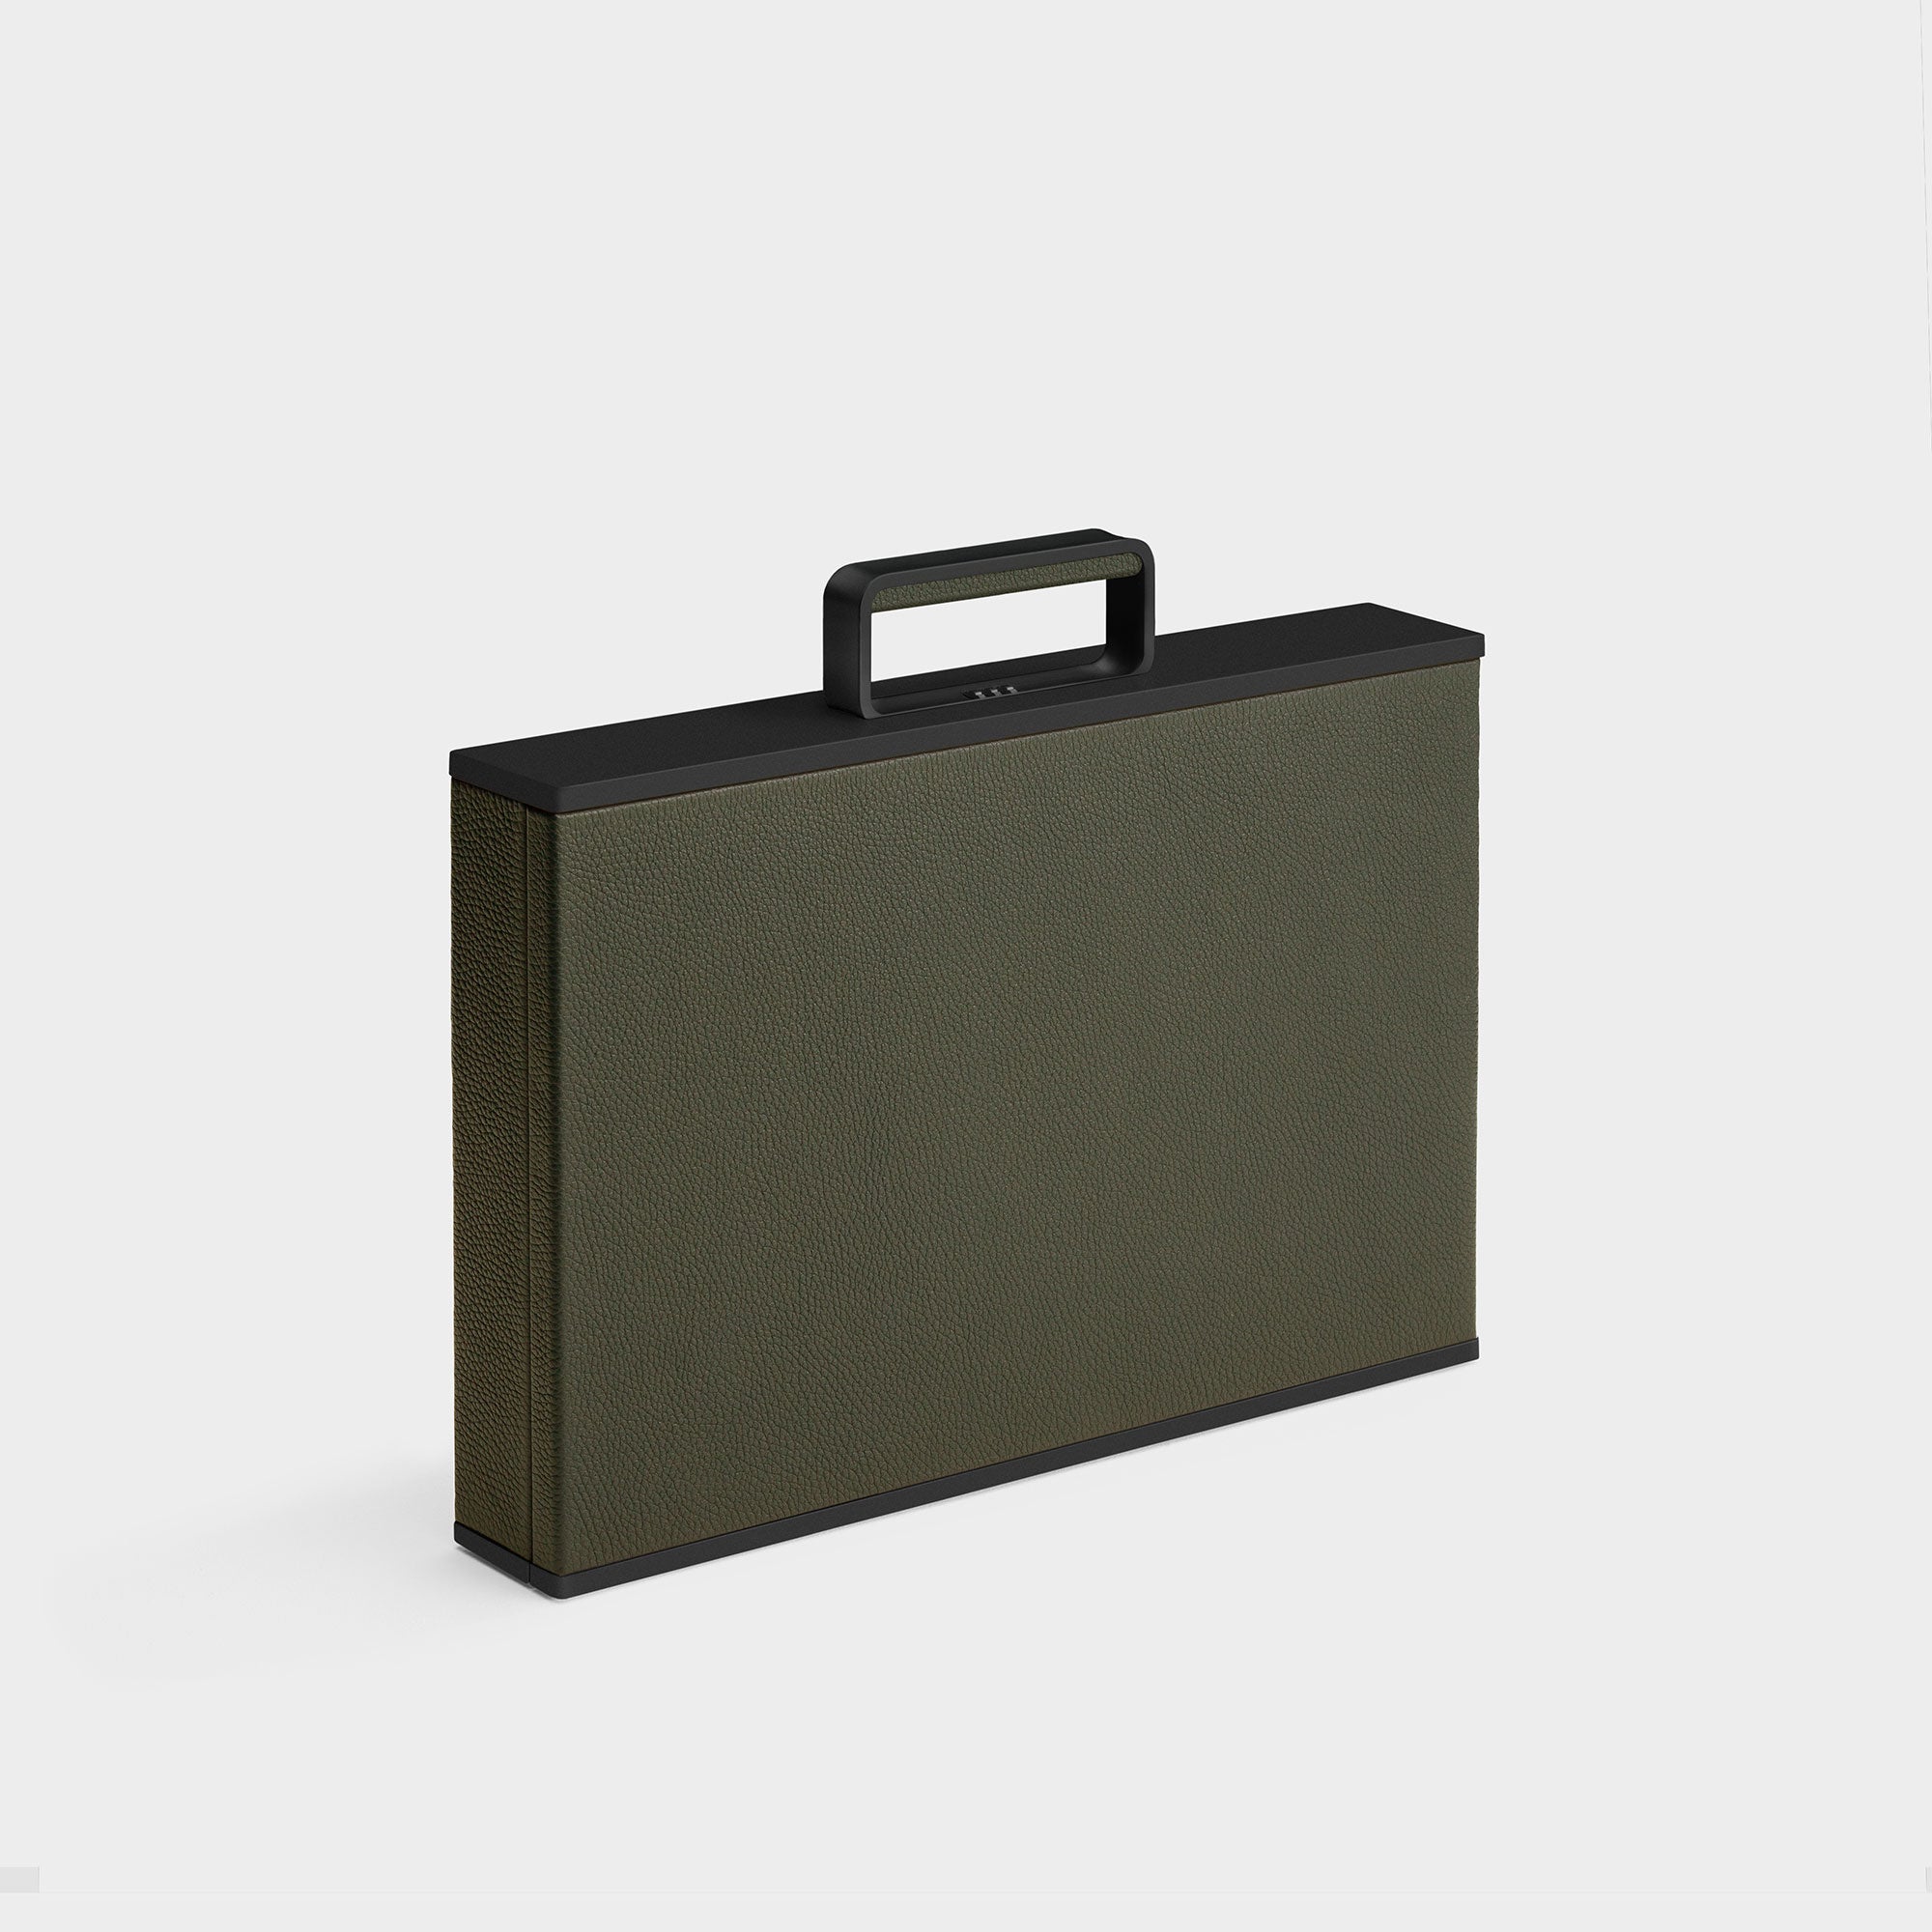 Designer watch briefcase in khaki leather. Handmade in Canada to hold up to 12 watches.